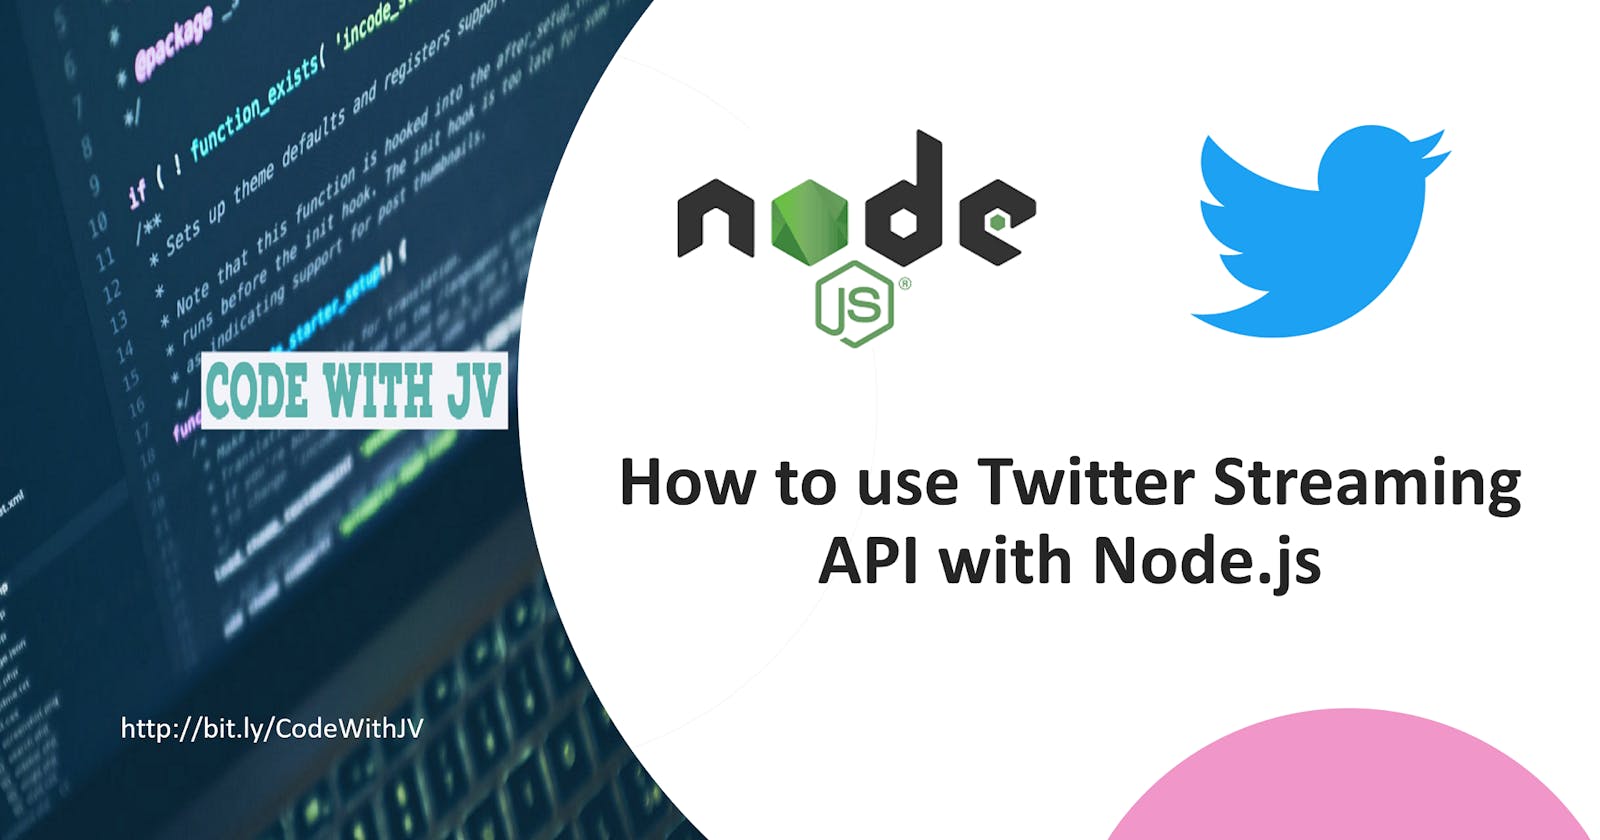 How to use twitter streaming API with Node.js